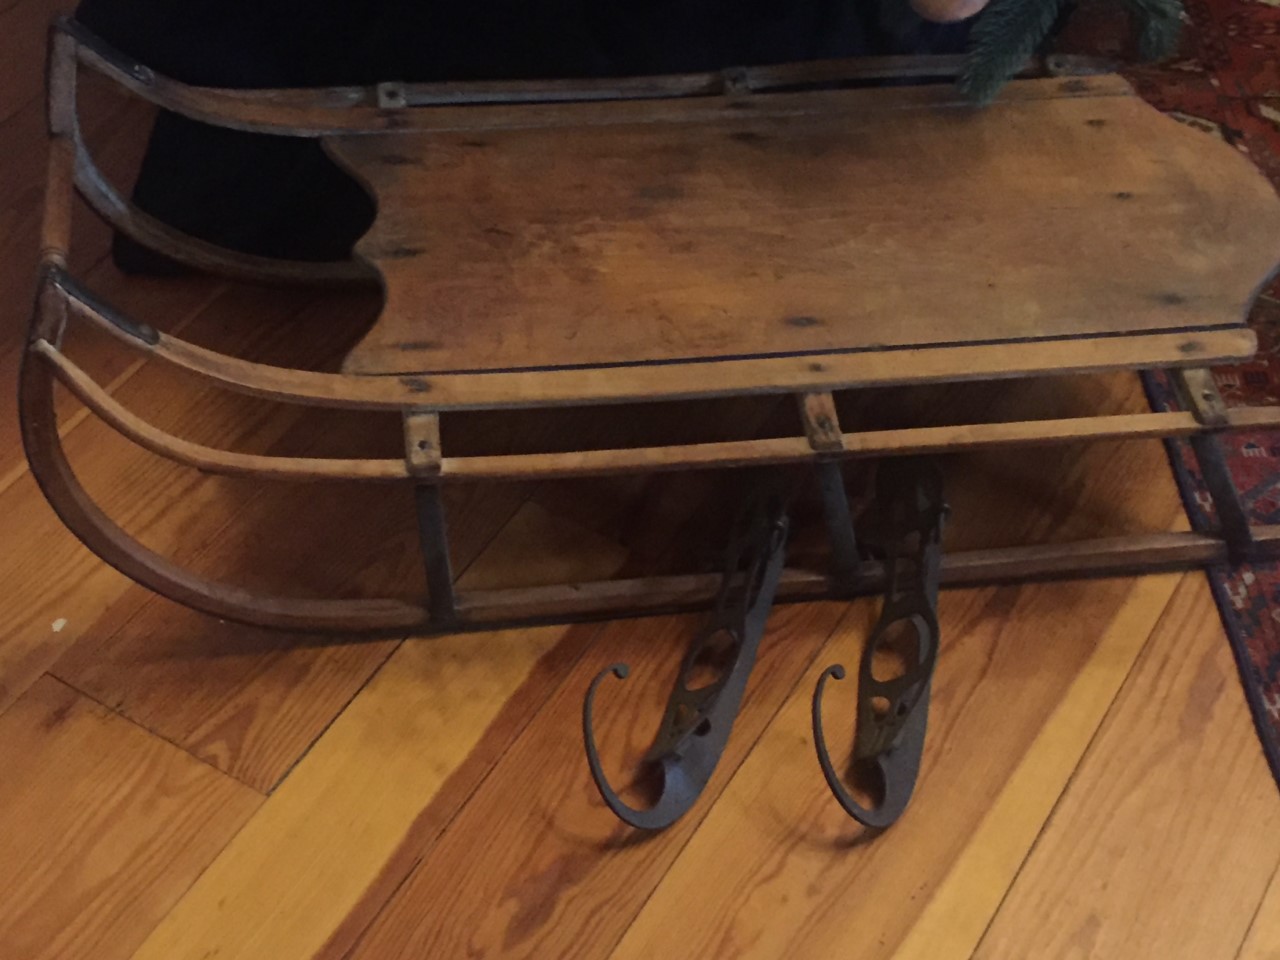 An antique wooden sled. Antique metal ice skates sit below the sled.